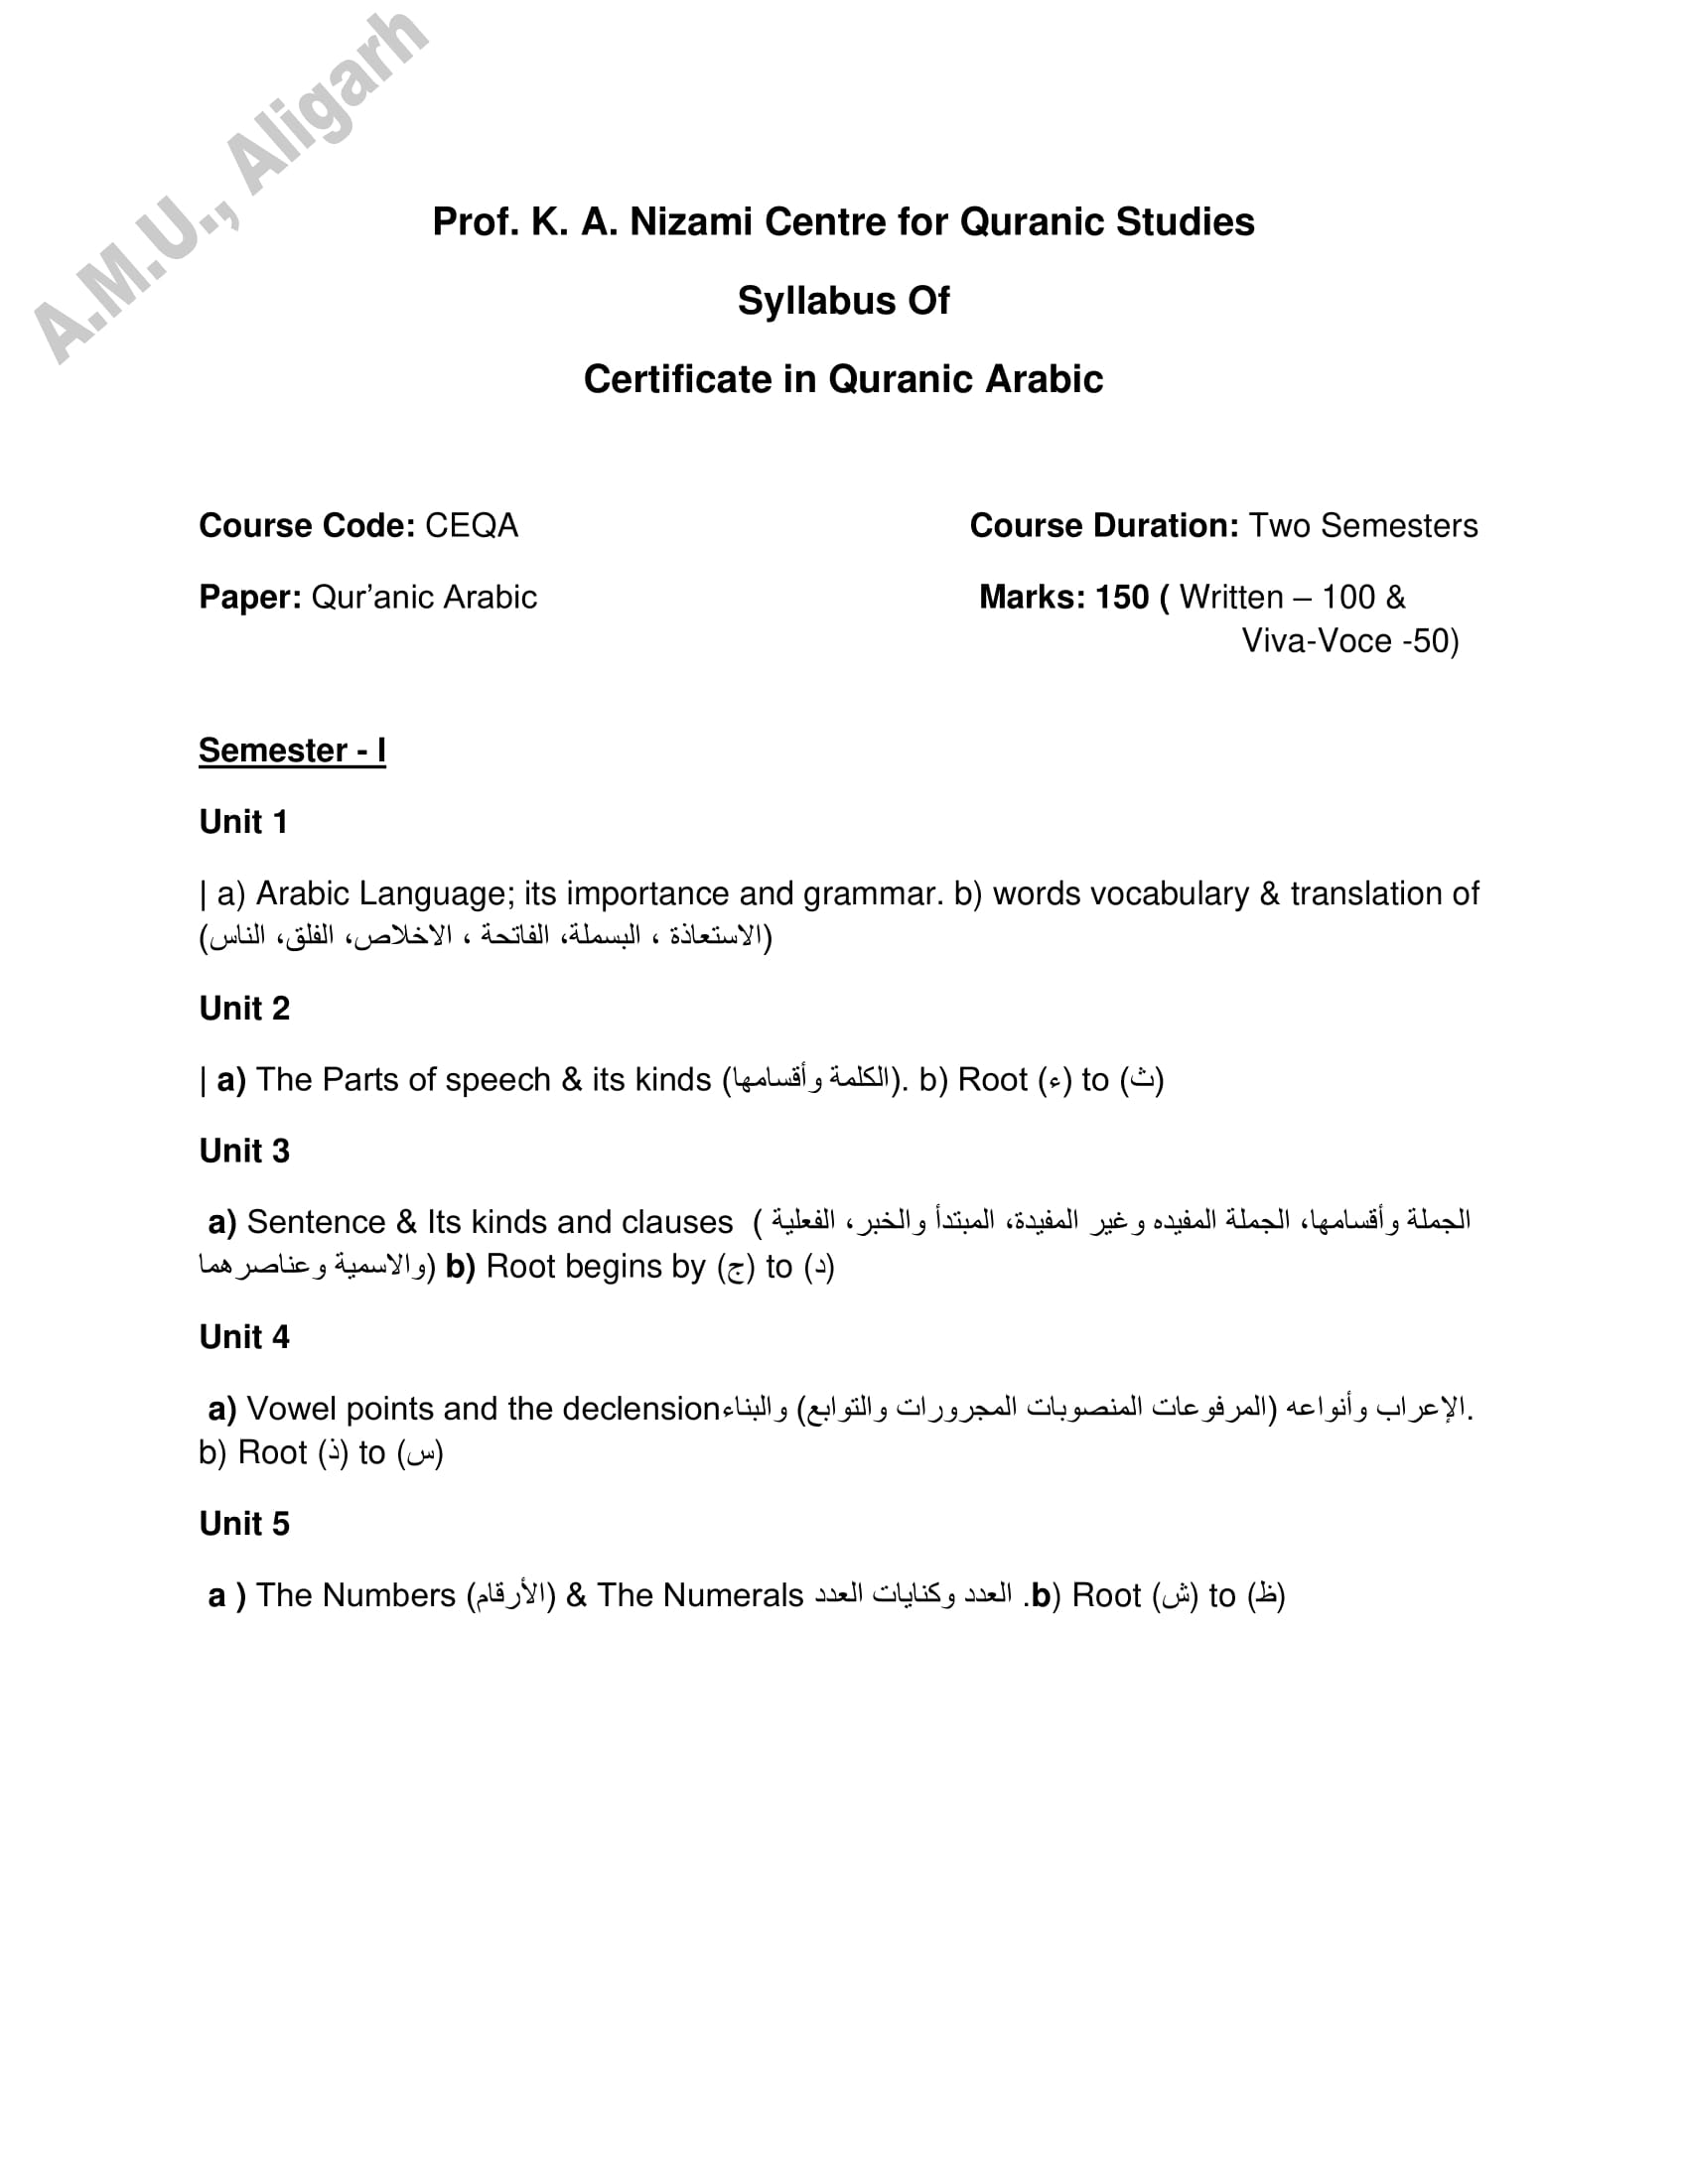 AMU Entrance Exam Syllabus for Certificate in Quranic Arabic - Page 1